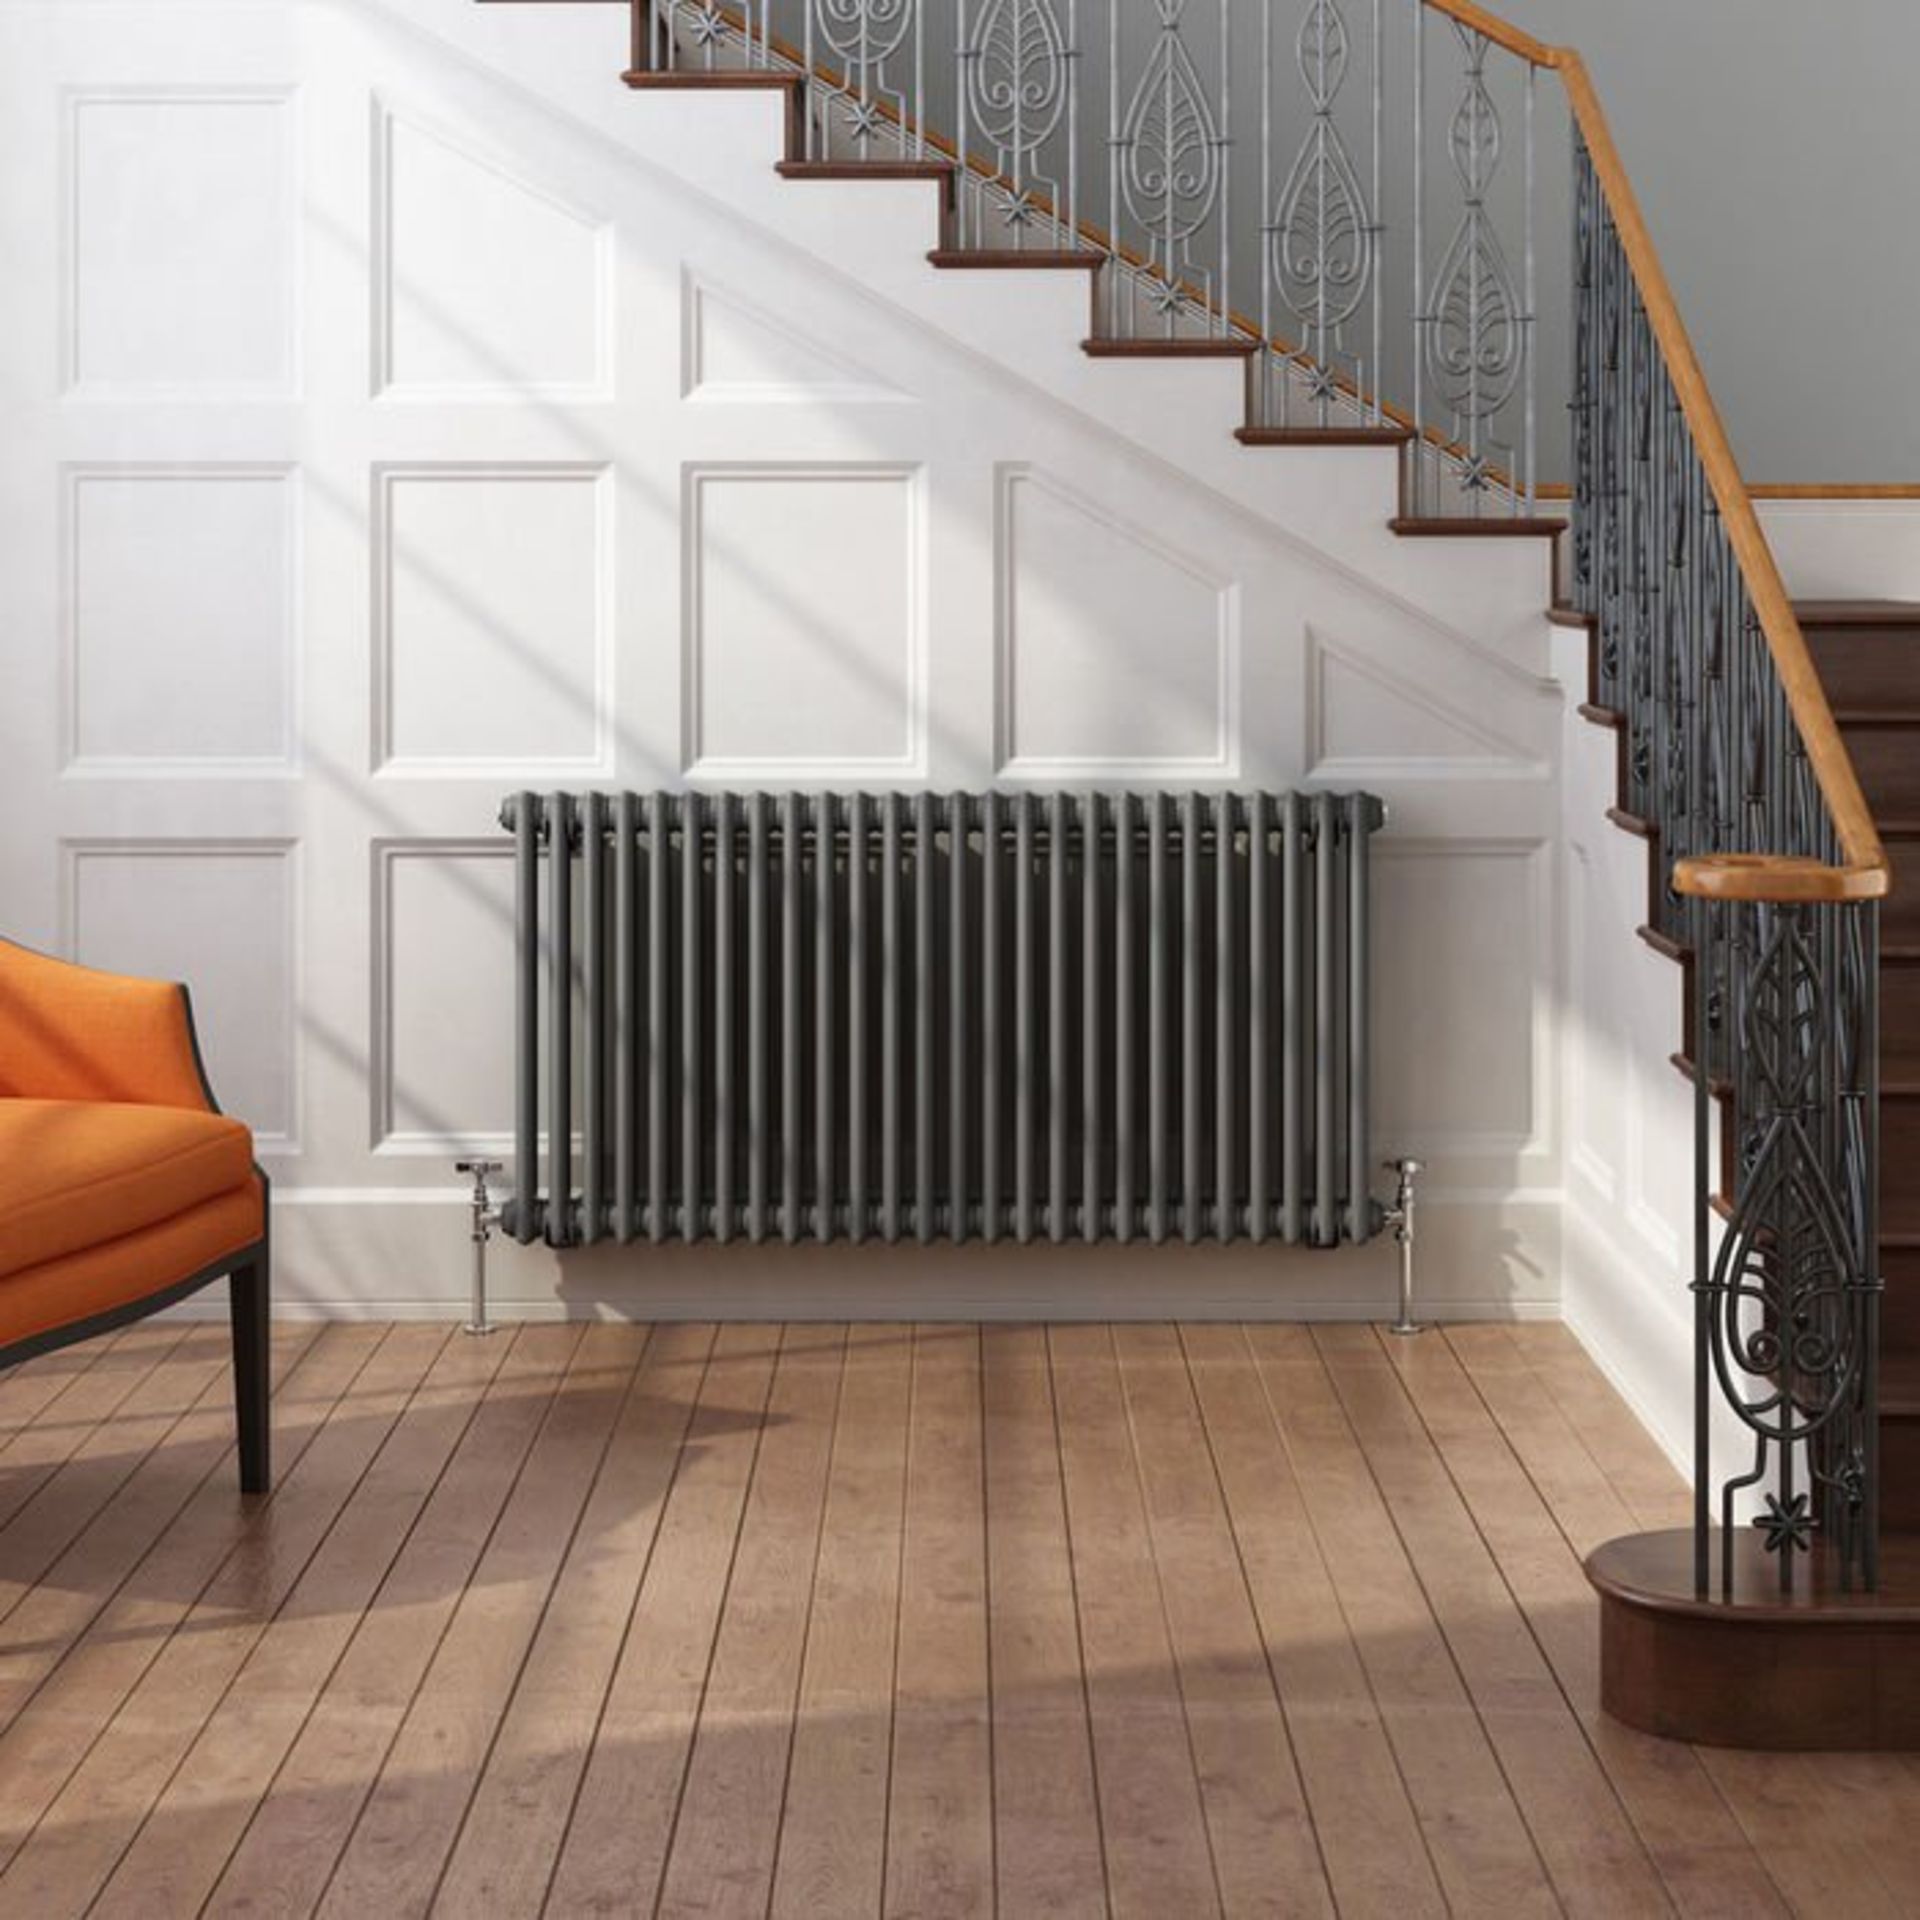 (L181) 600x1188mm Anthracite Double Panel Horizontal Colosseum Traditional Radiator. RRP £599.99. - Image 2 of 3